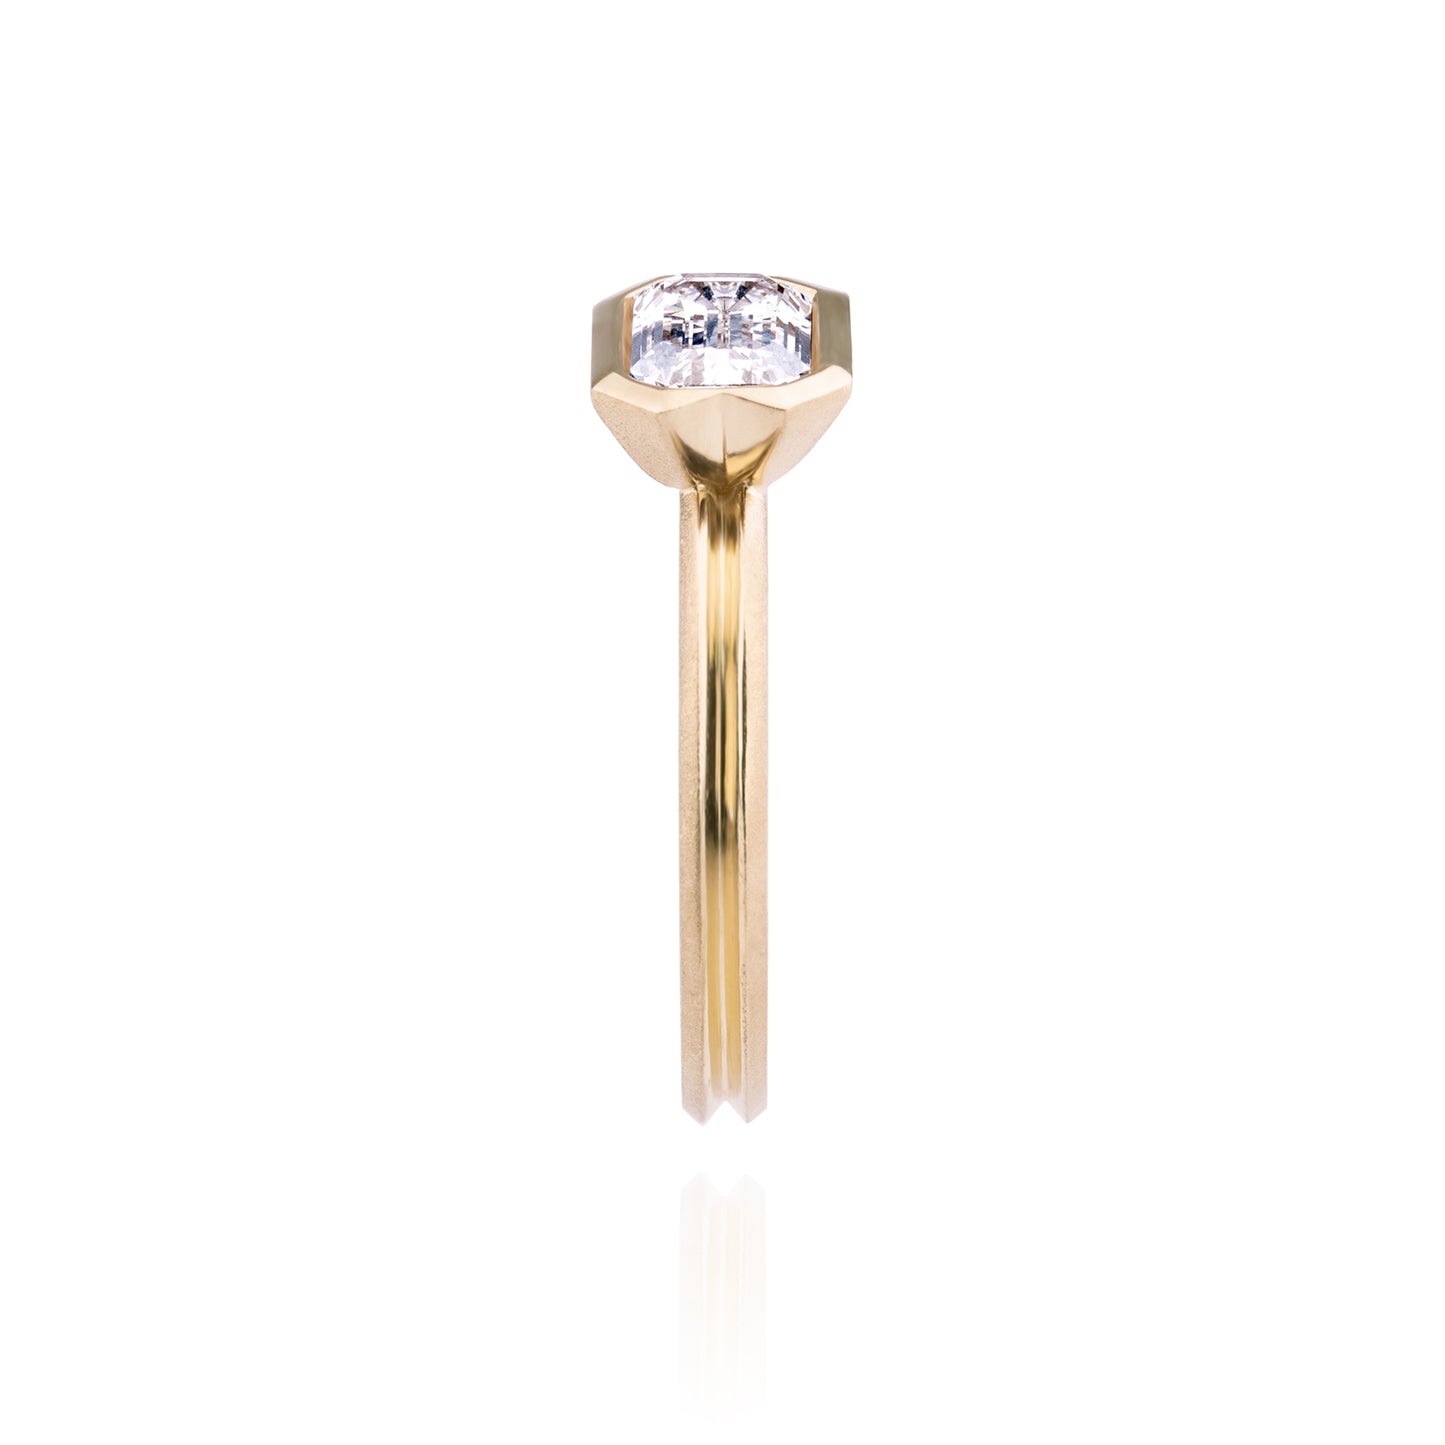 Orme-Brown Contemporary Fine Jewellery Double Dune Engagement Ring Emerald Cut Diamond 18ct Gold Recycled Fairmined Ethical Sustainable